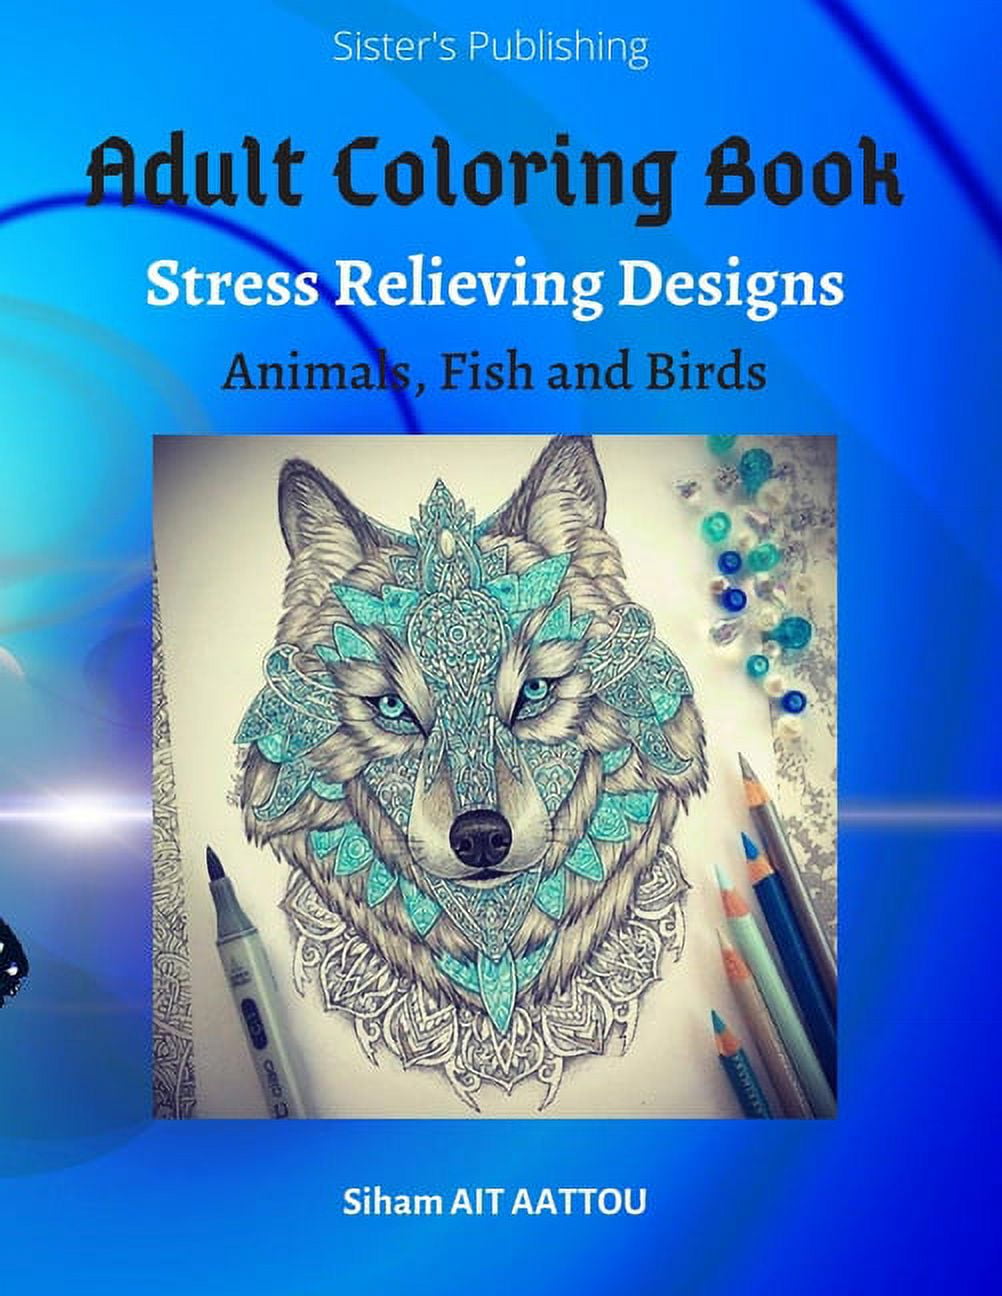 Adult Coloring Books Value Set -- 4 Assorted Coloring Books for Adults with  Colored Pencils Kit (Over 120 Stress Relieving Patterns)